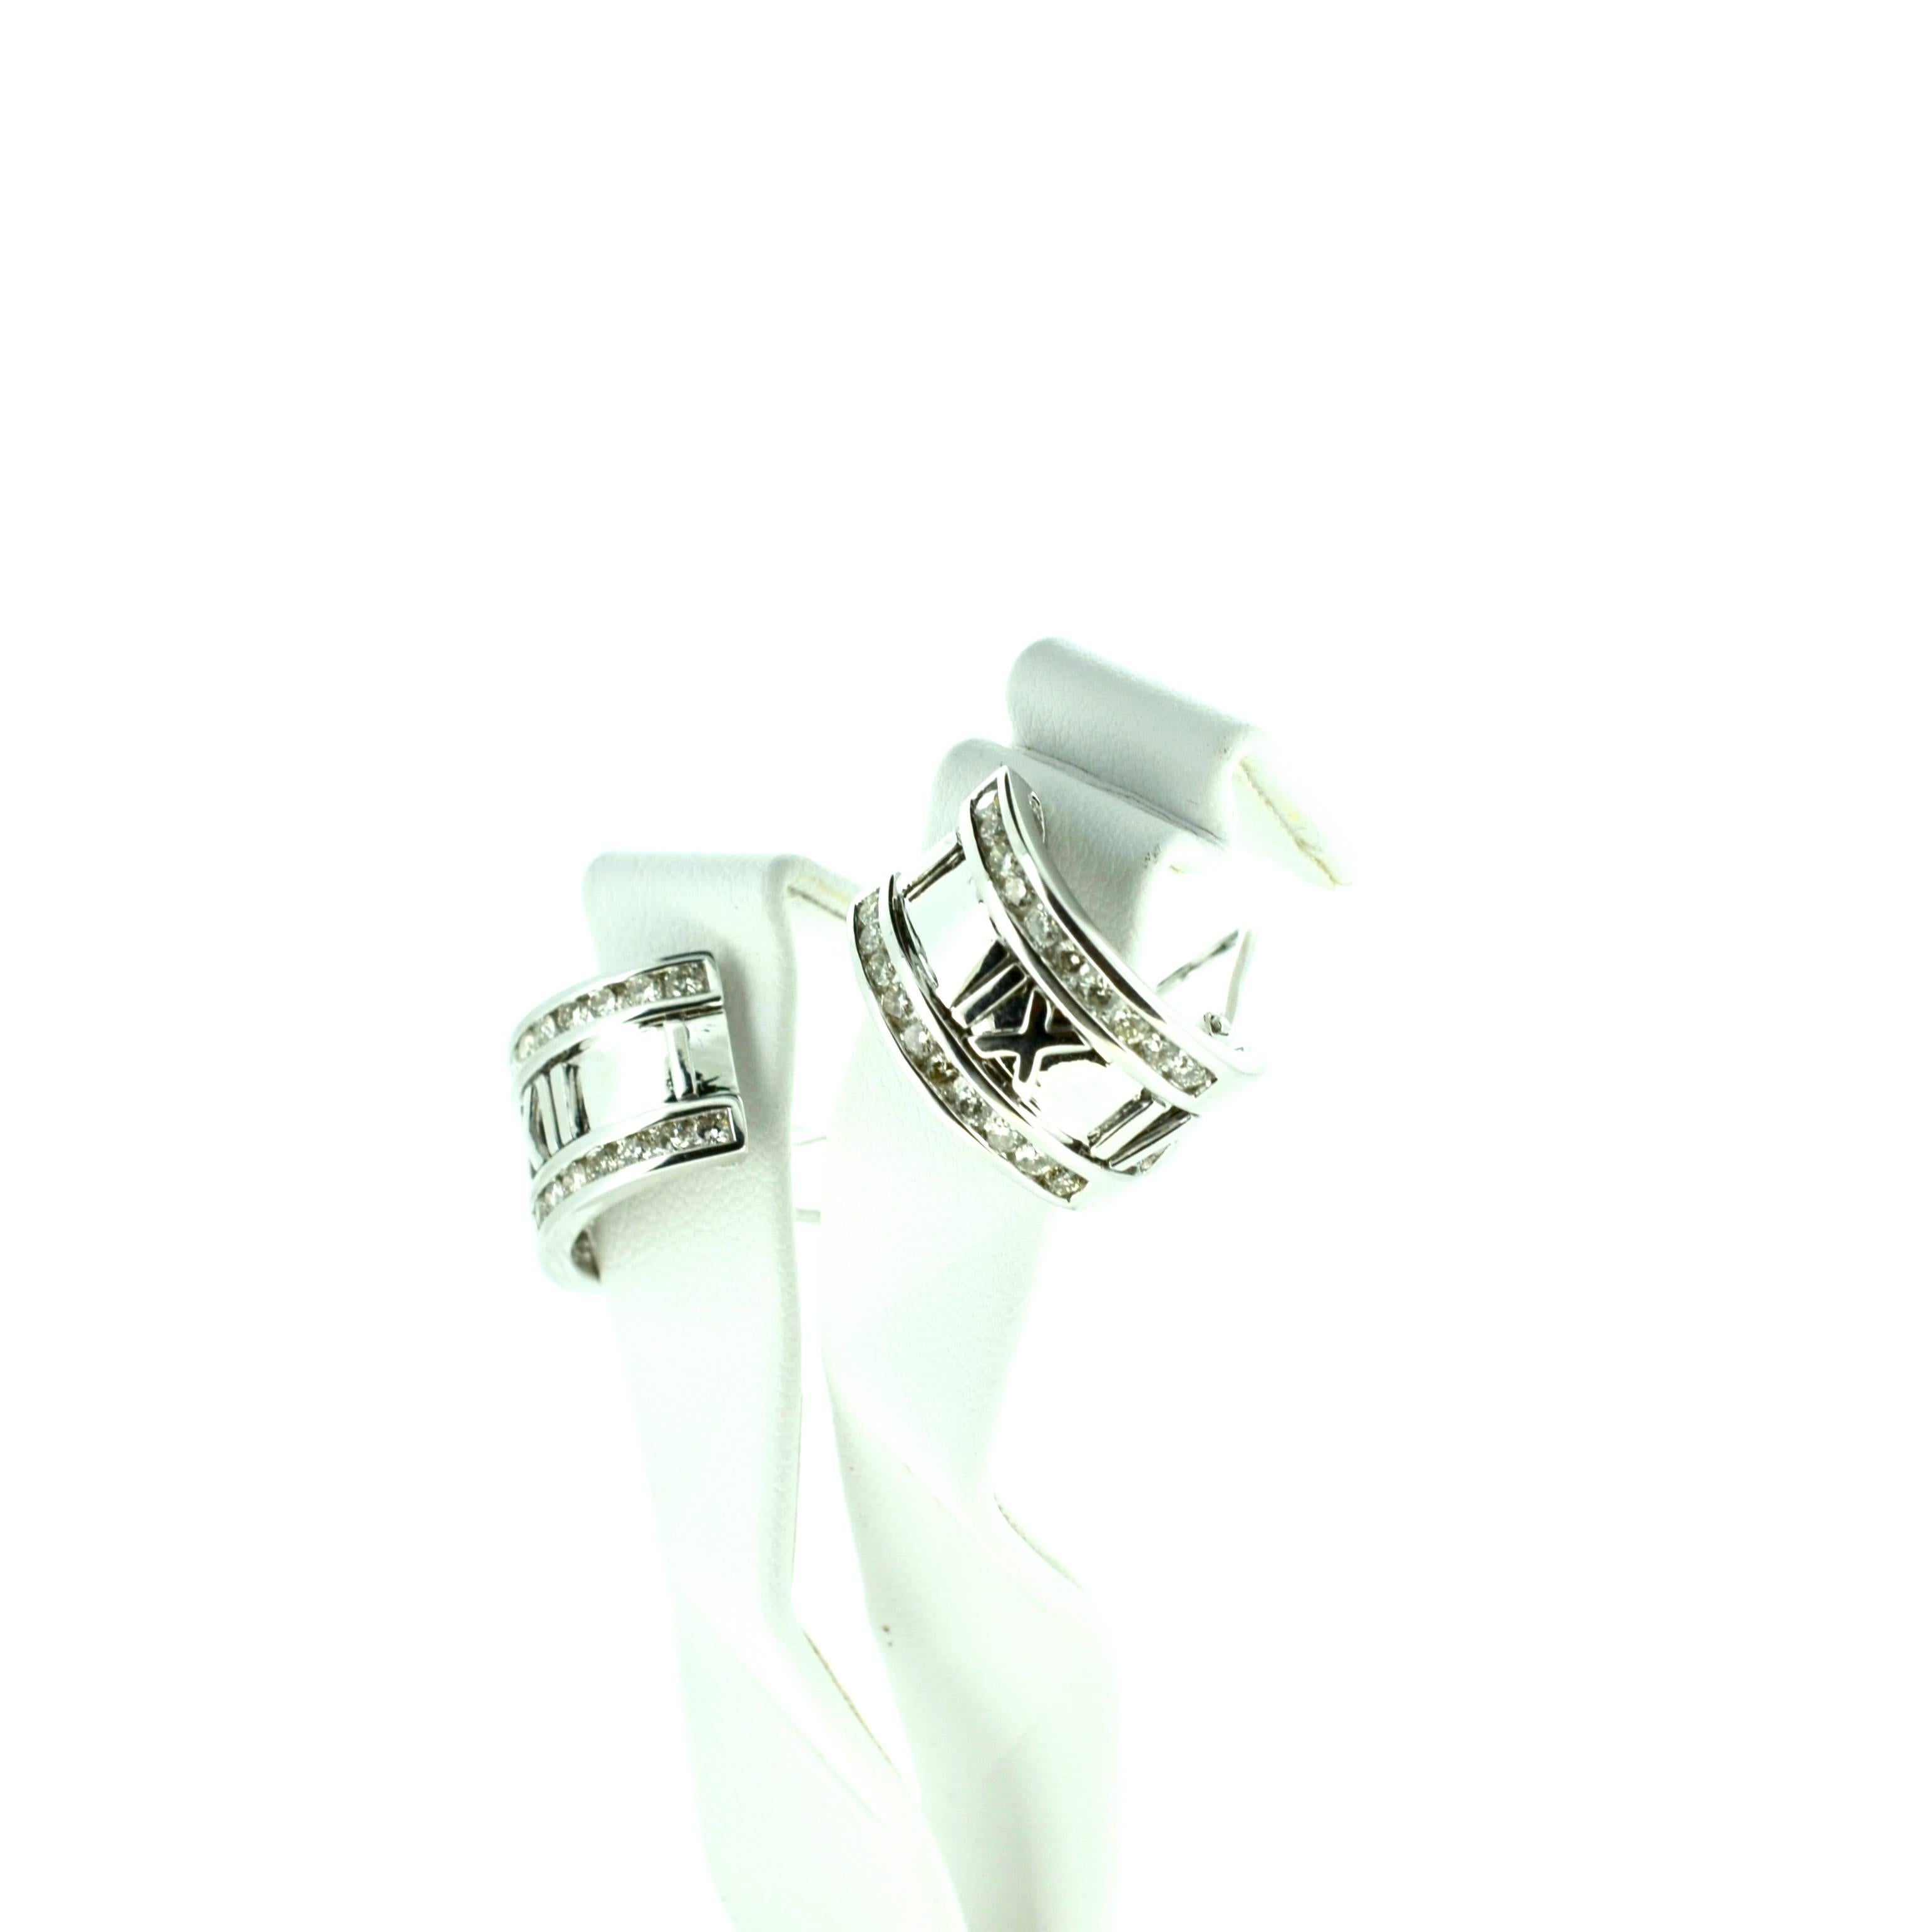 Diamond cuff earrings 11mm wide in 14kt white gold with half hoops. 1.15ct total weight diamonds in VS G-H color